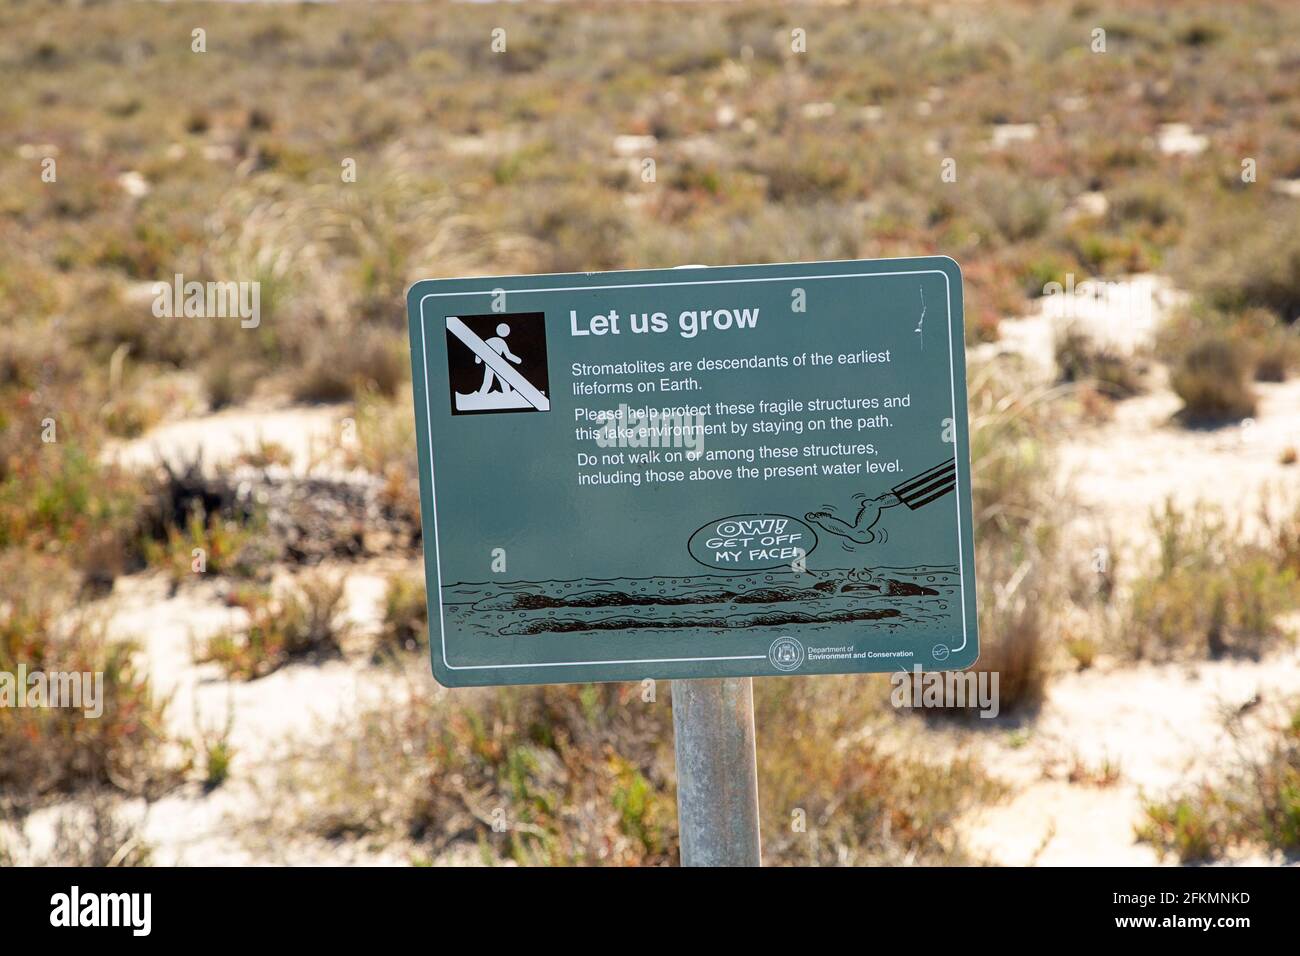 Cervantes, Western Australia - May 2nd 2021: Department of Environment and Conservation sign at Lake Thetis, Cervantes, warning people to not stand on Stock Photo